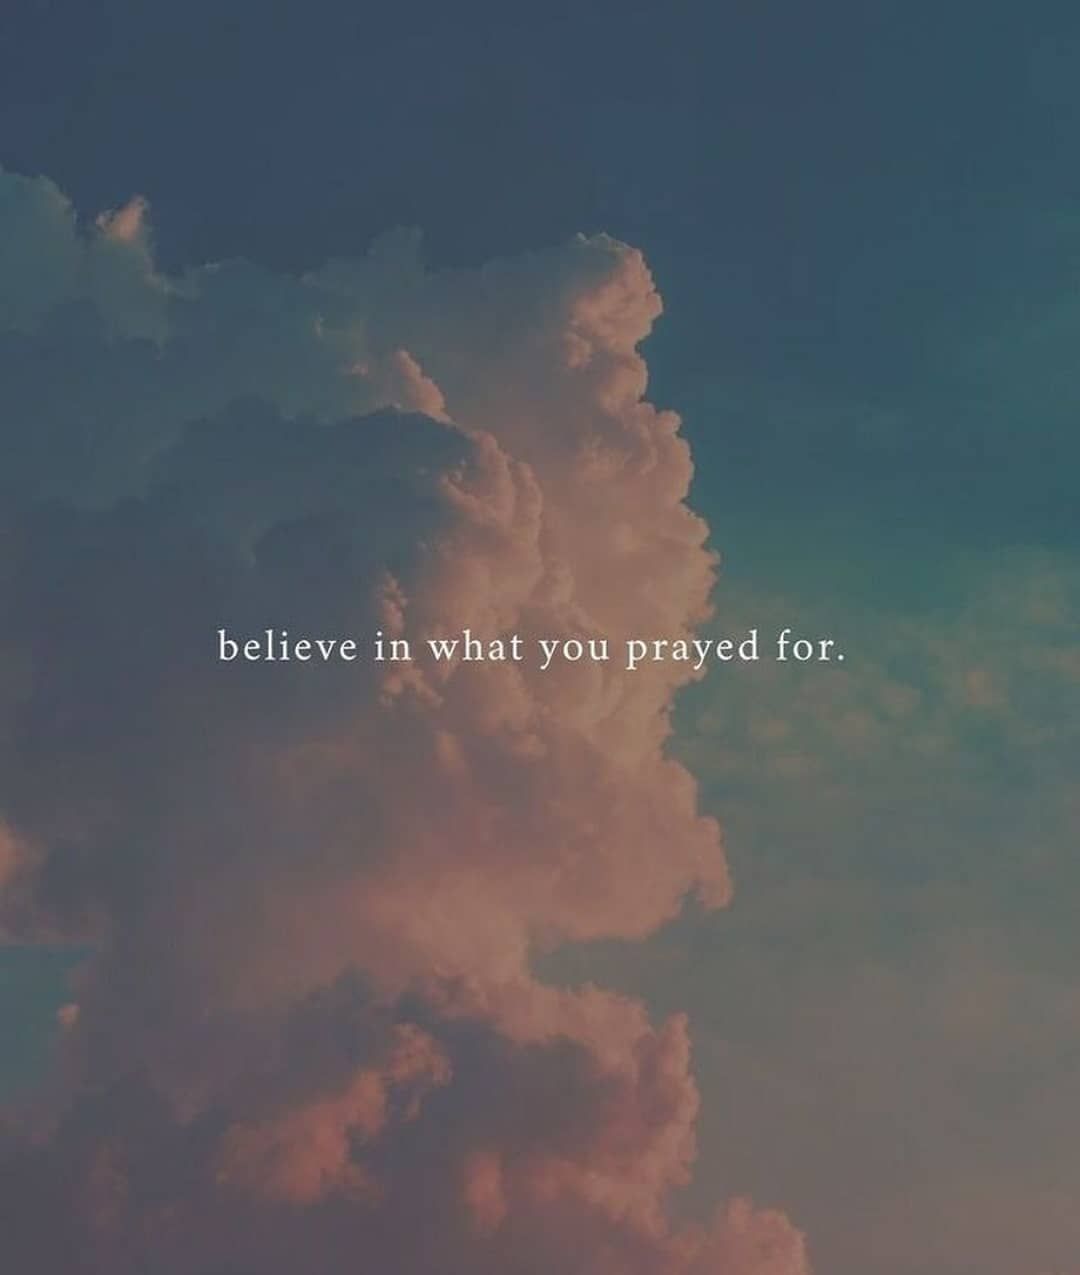 Believe in what you prayed for.